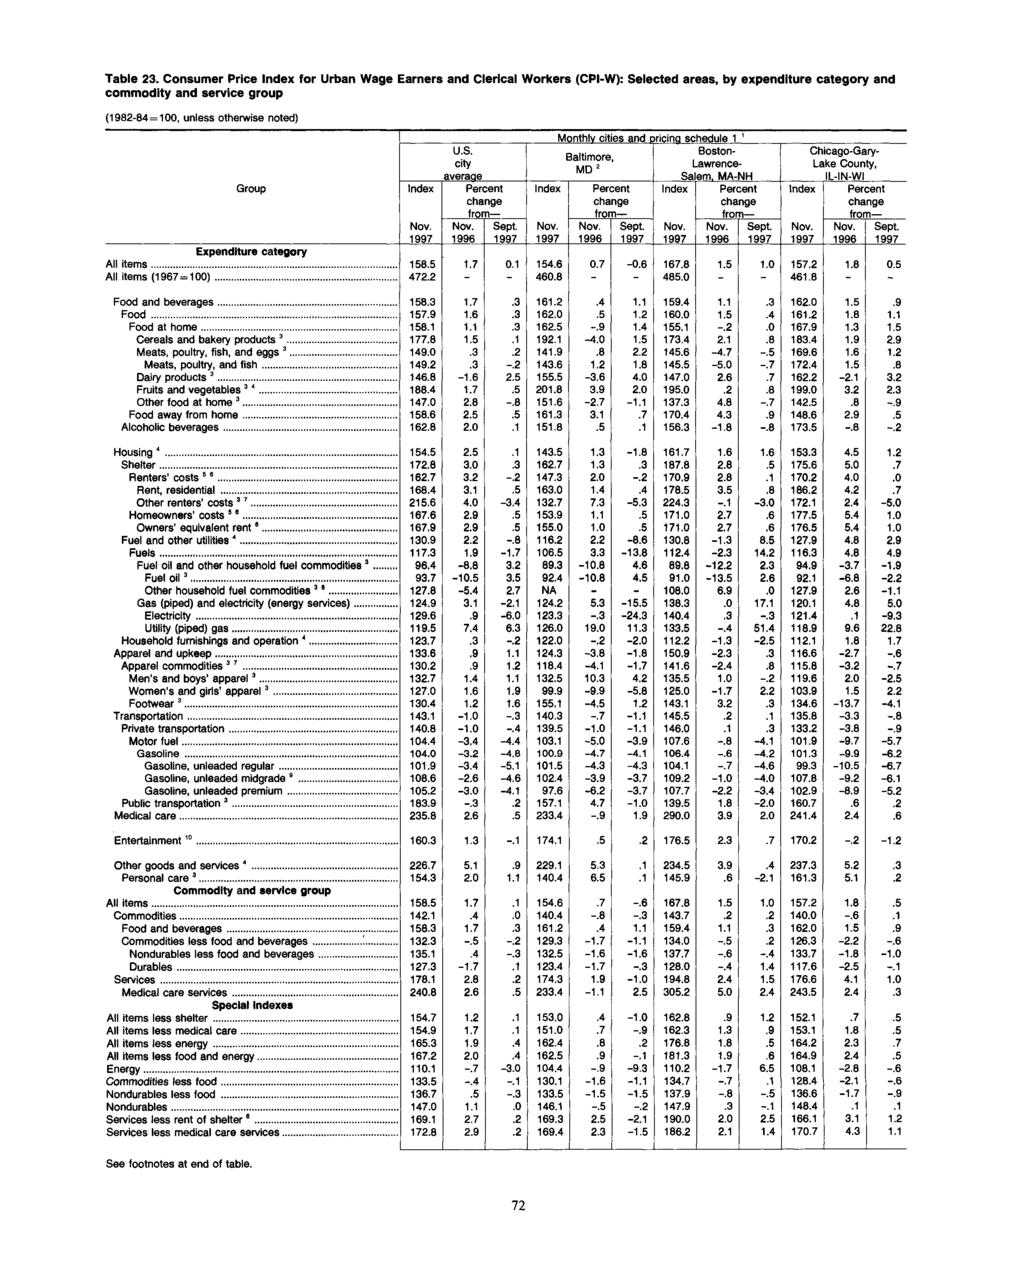 Table 23. Consumer Price for Urban Wage Earners and Clerical Workers (CPI-W): Selected areas, by expenditure category and commodity and service group U.S. city averaae Group Percent Sept.